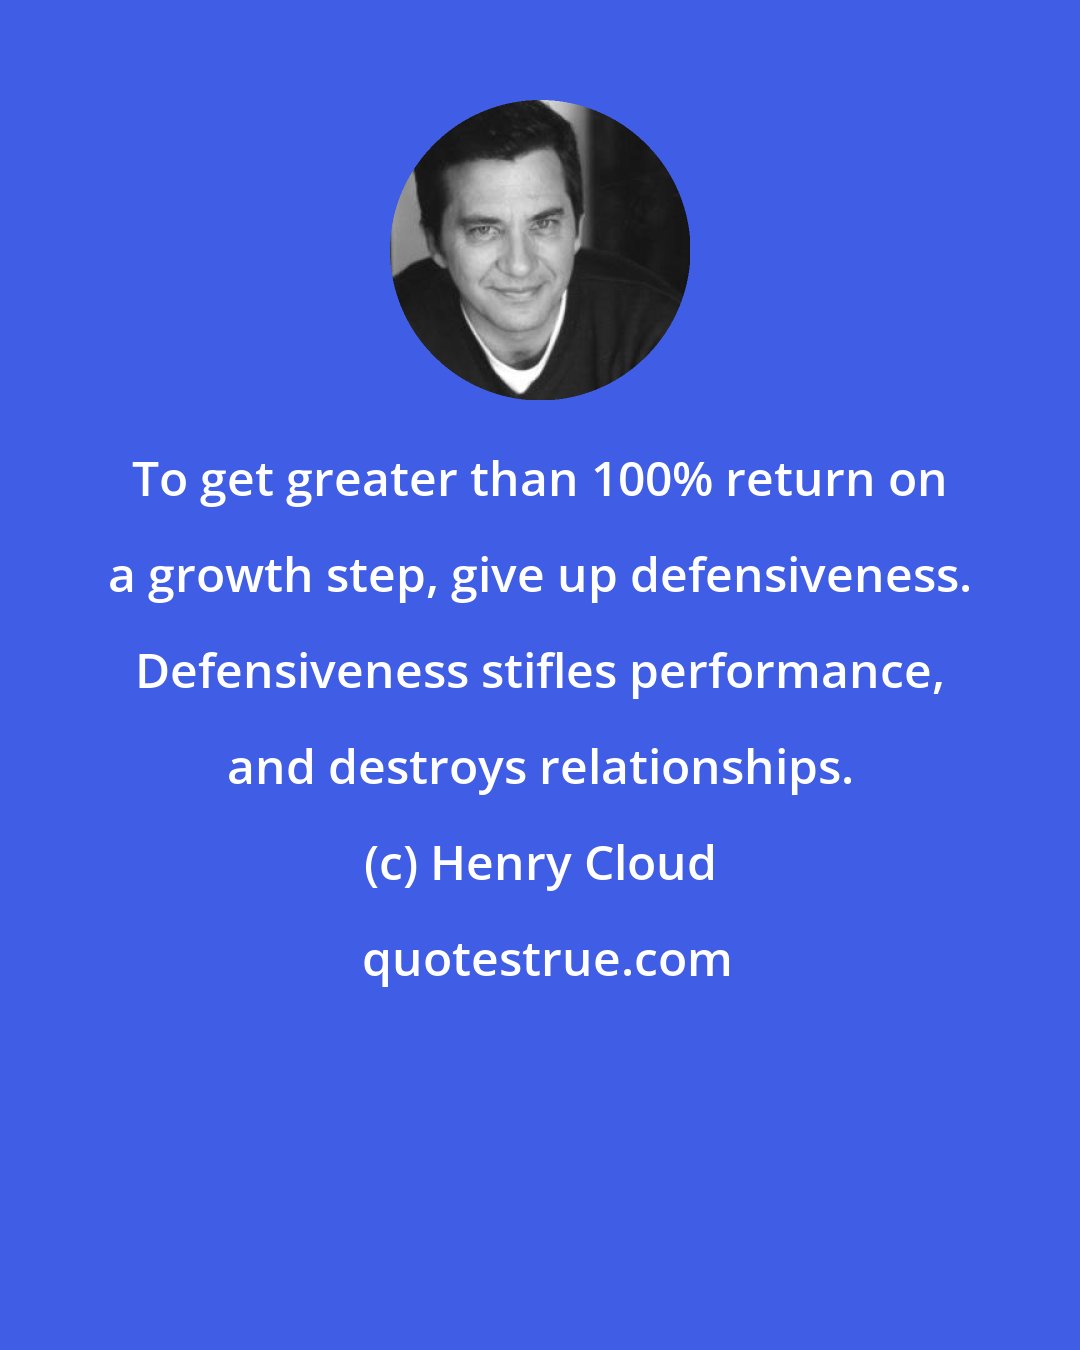 Henry Cloud: To get greater than 100% return on a growth step, give up defensiveness. Defensiveness stifles performance, and destroys relationships.